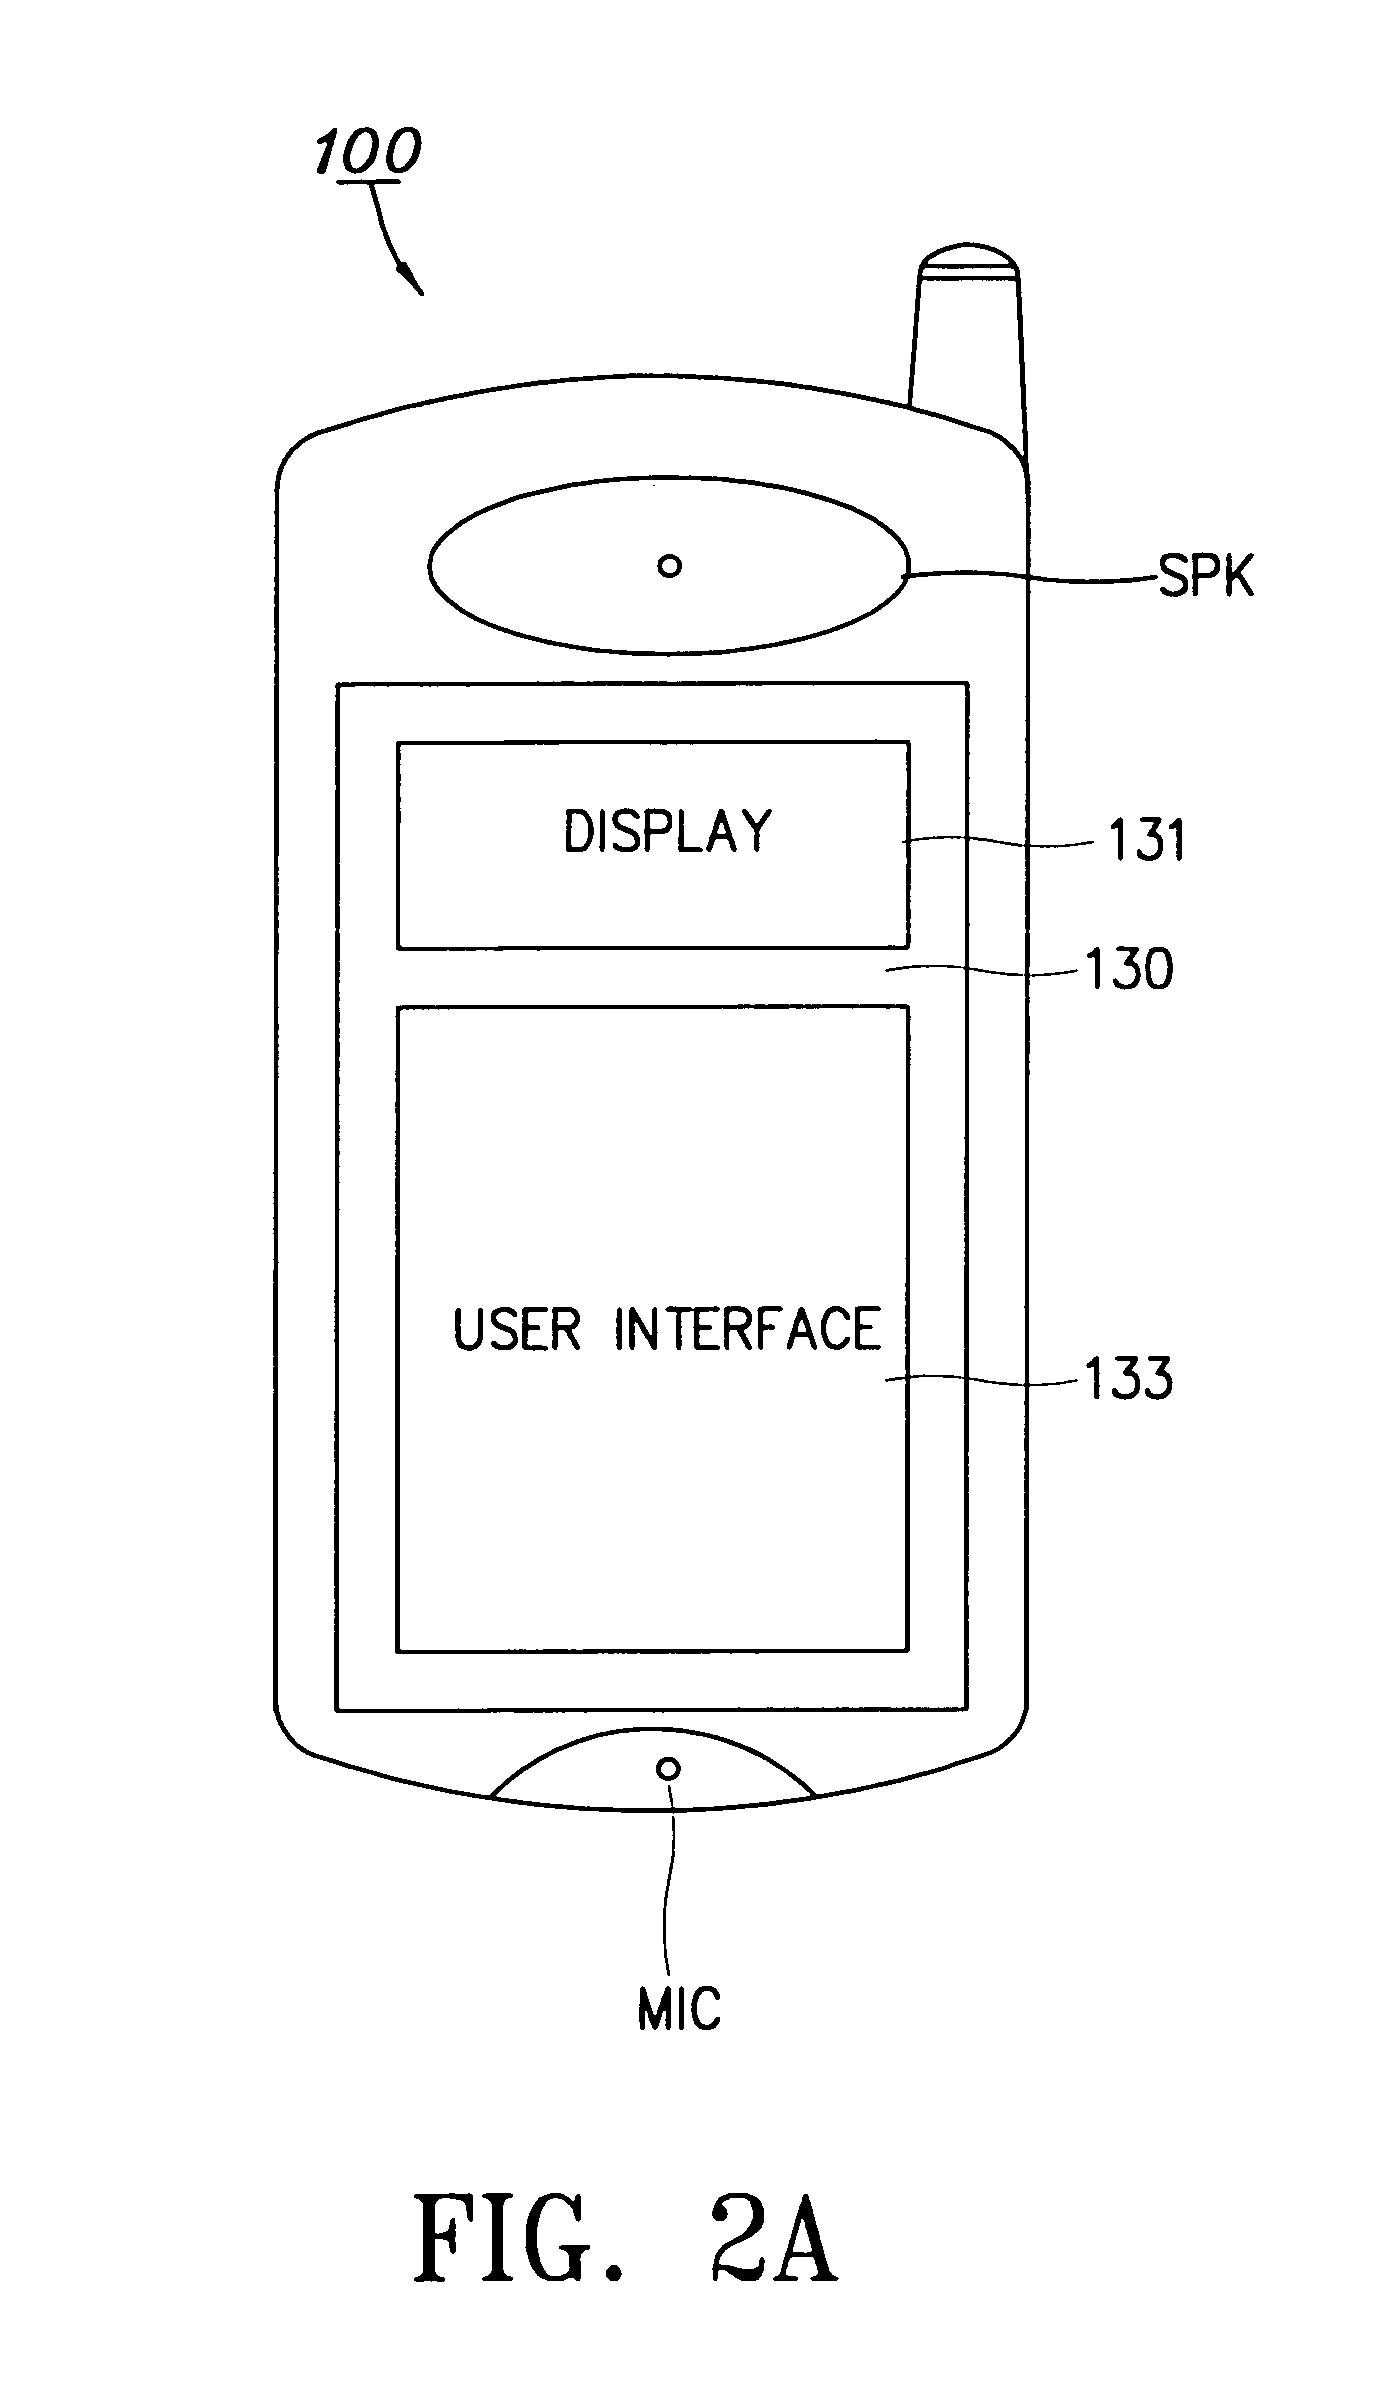 Speed dialing method using symbols in communication terminal having touch pad